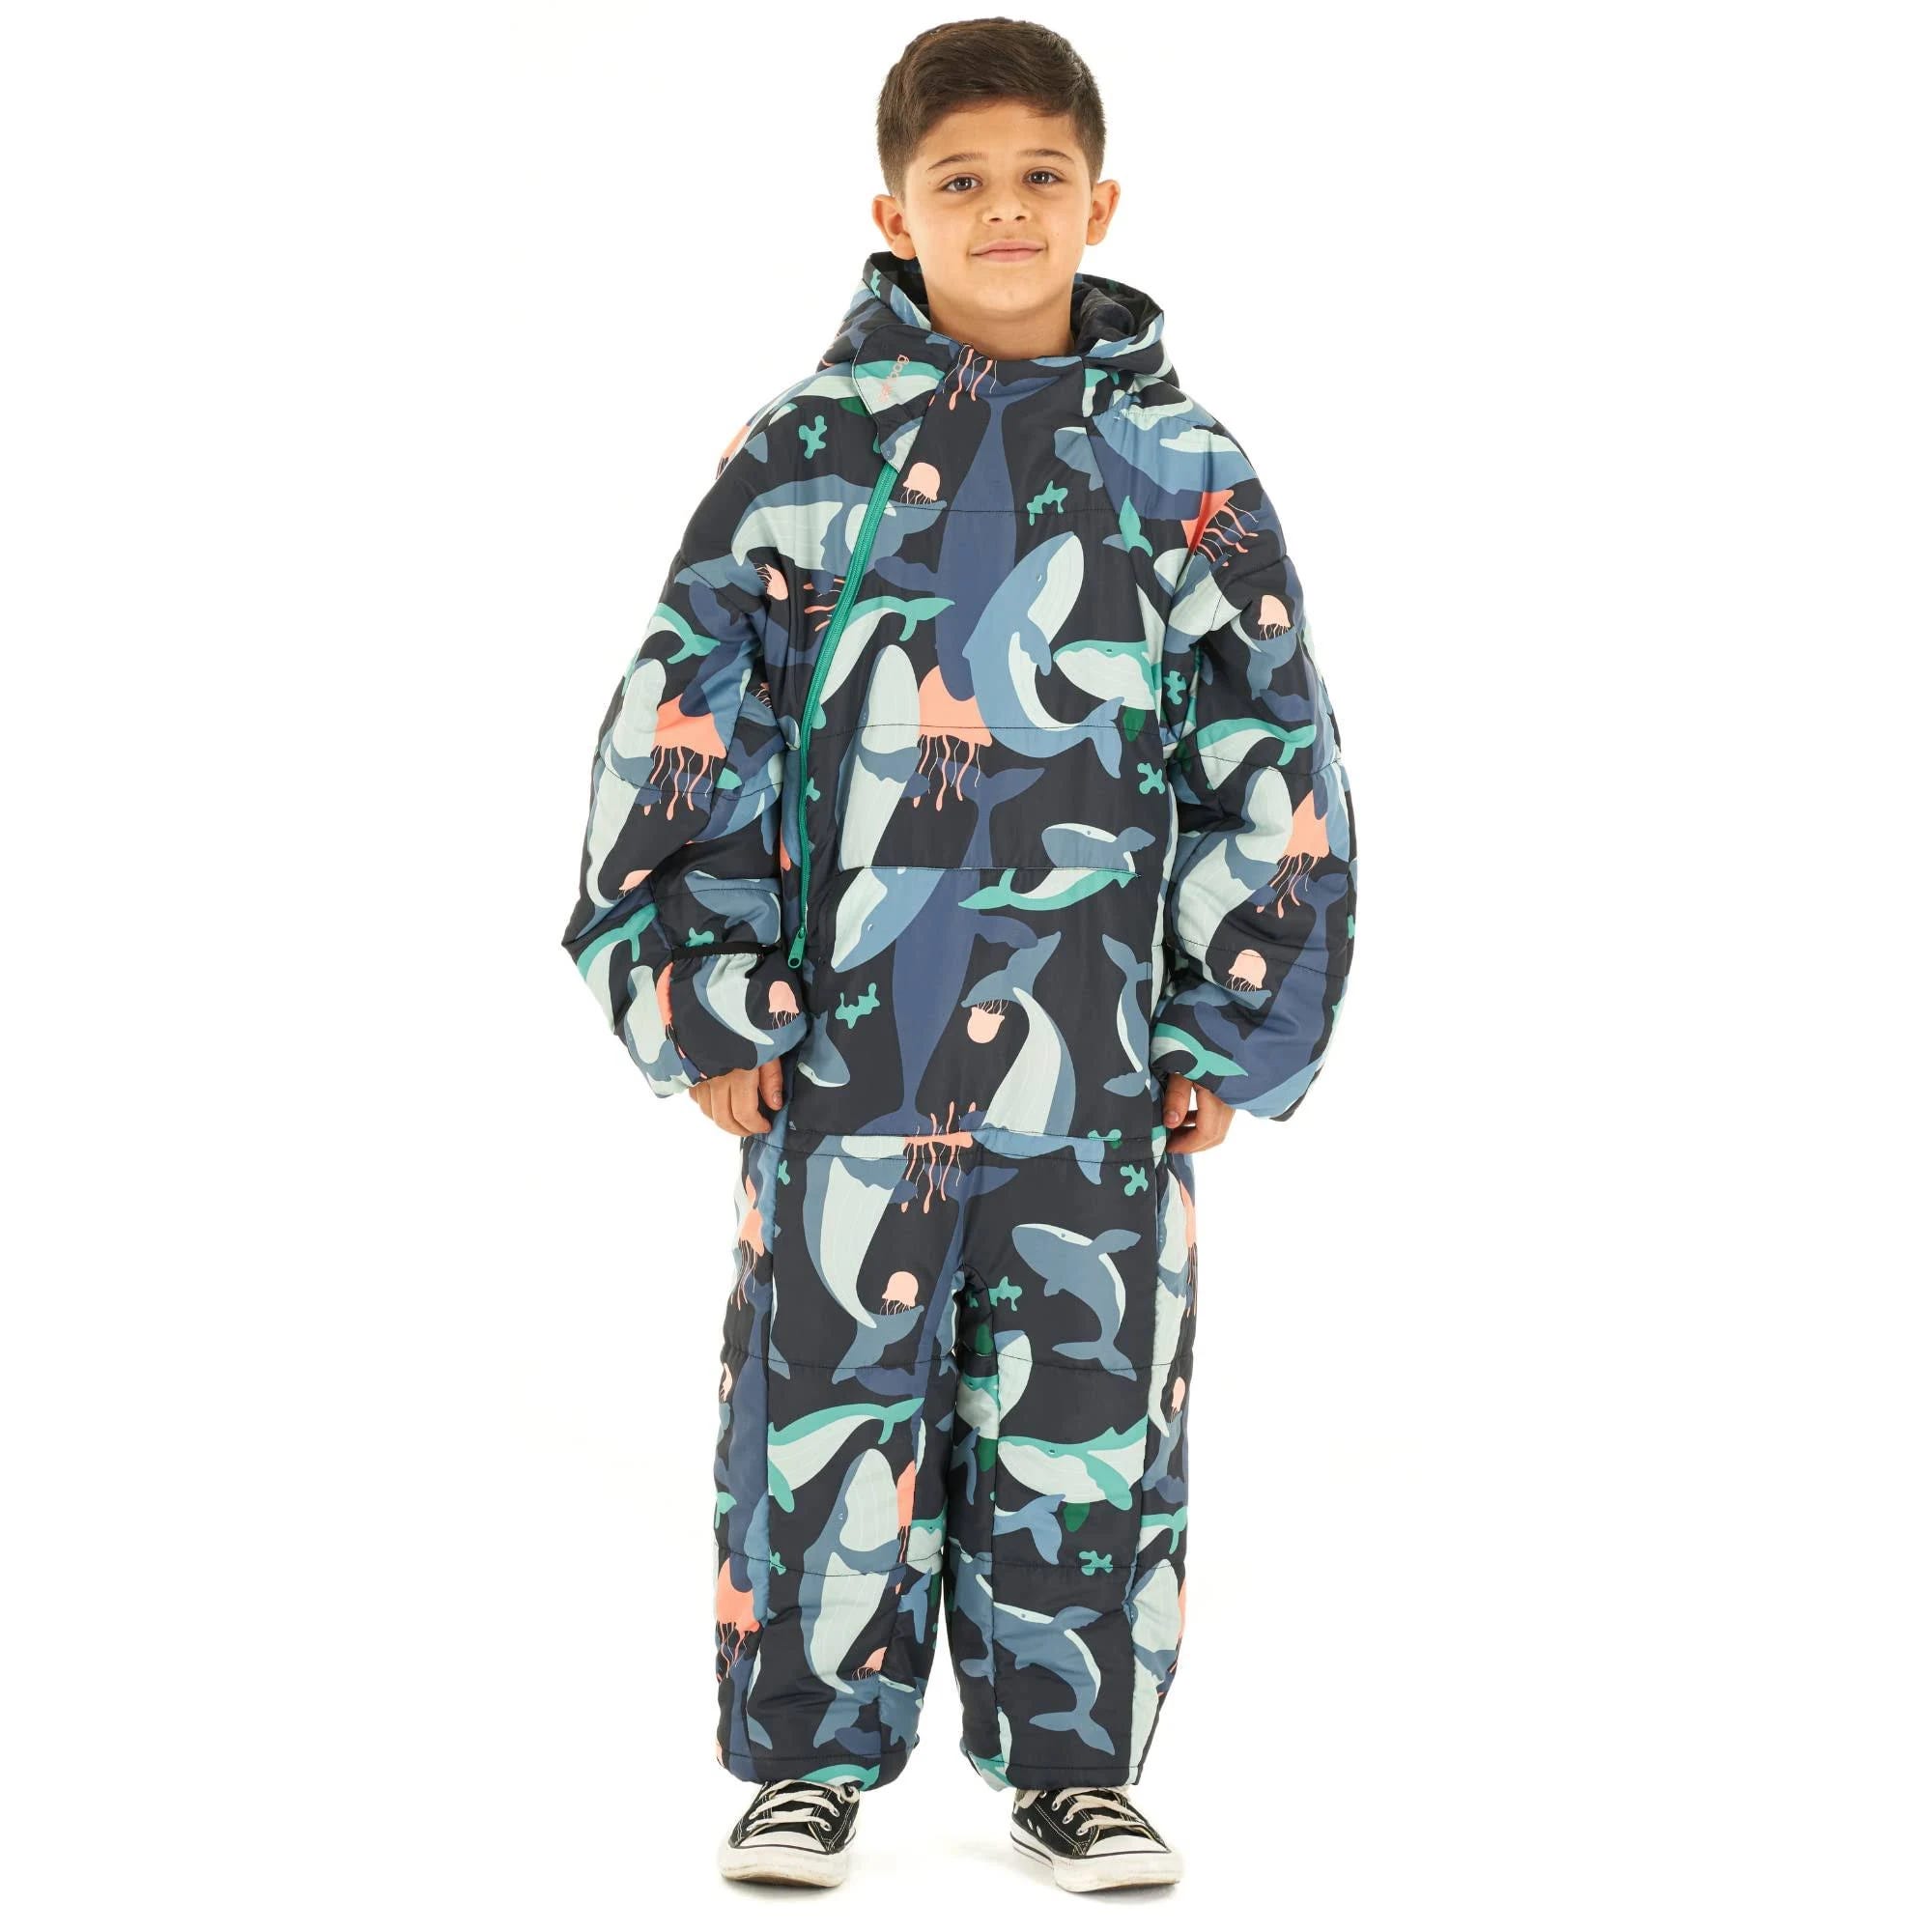 Cozy Kids' Wearable Sleeping Bag for Camping and Adventures | Image